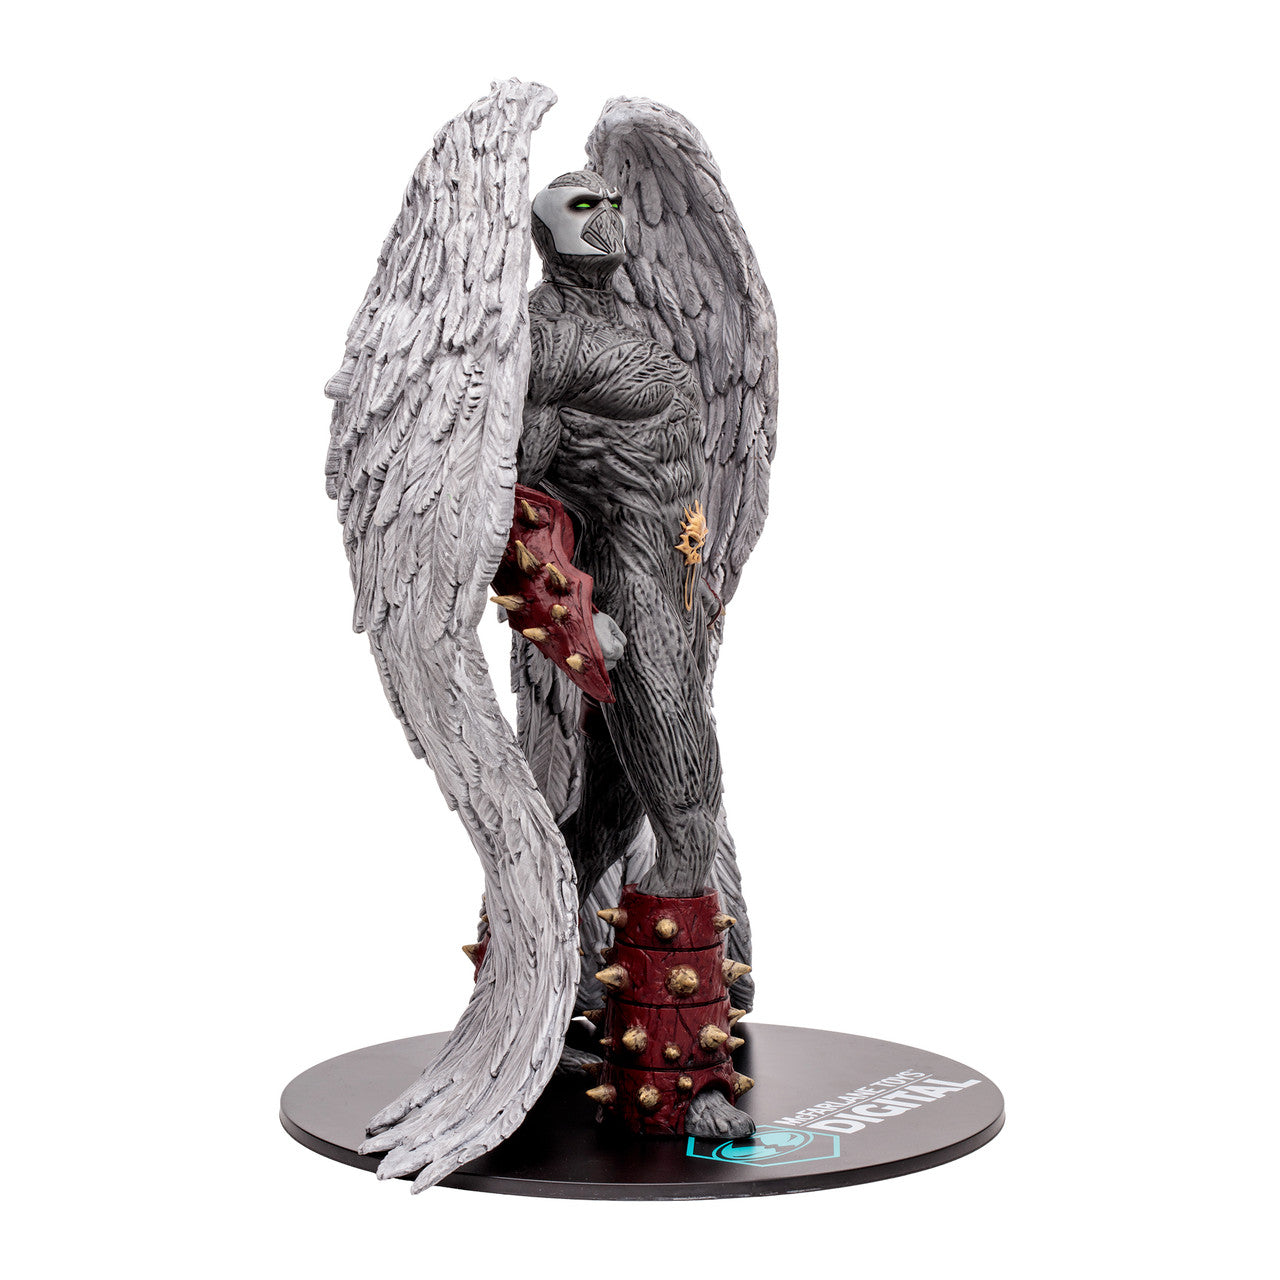 [PRE-ORDER] Spawn (Wings of Redemption) 1:8 Statue w/Digital Collectible  12-Inch Posed Statue